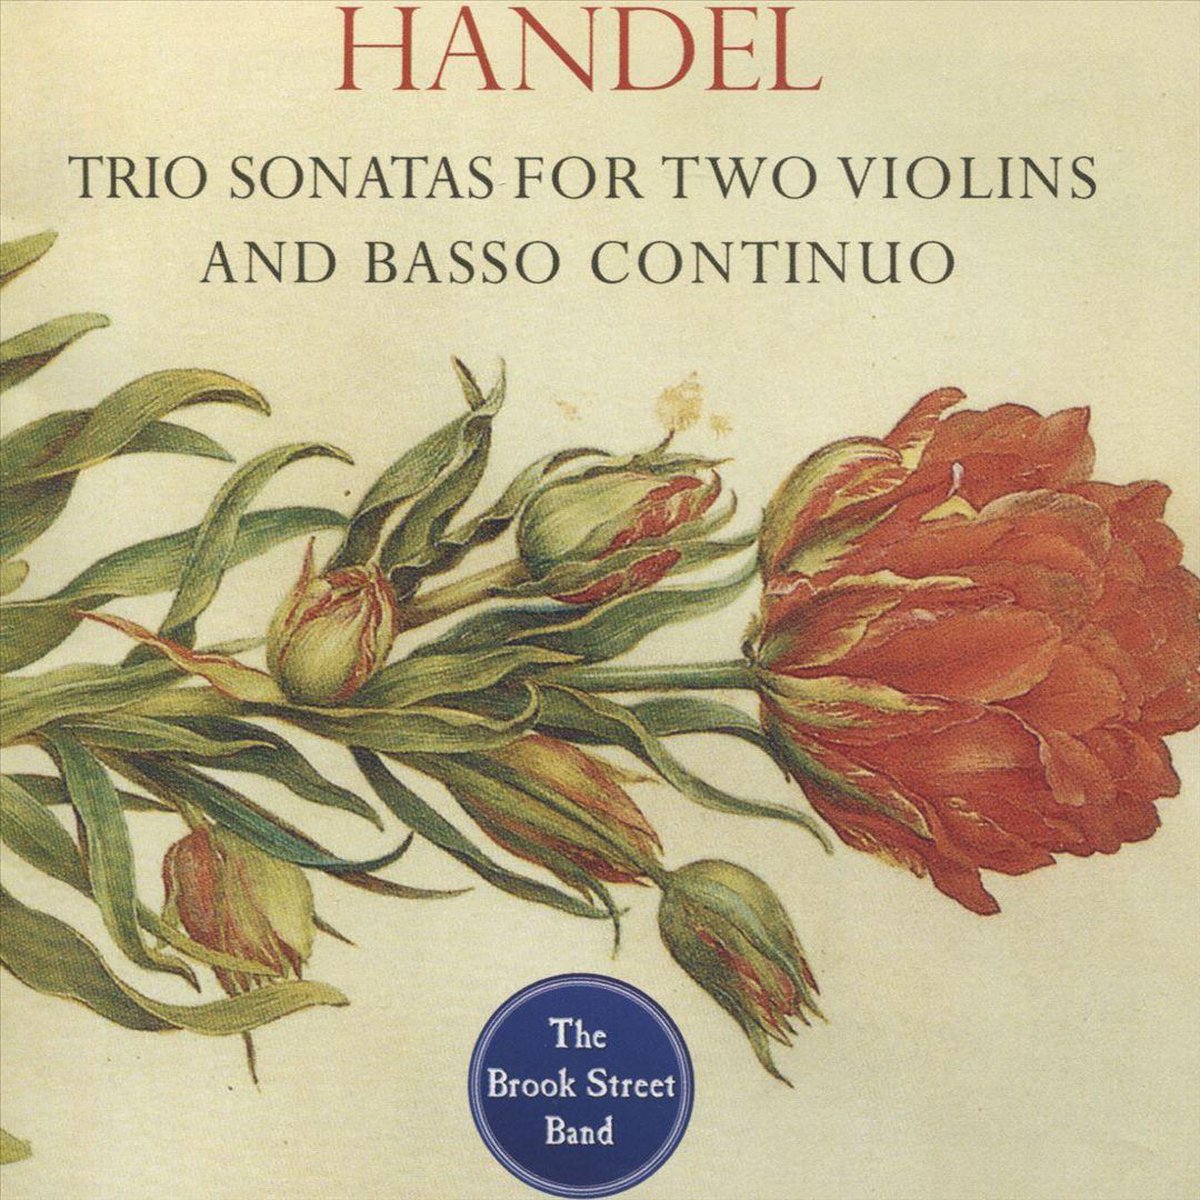 Handel: Trio Sonatas for Two Violins and Basso Continuo | George Frideric Handel, The Brook Street Band